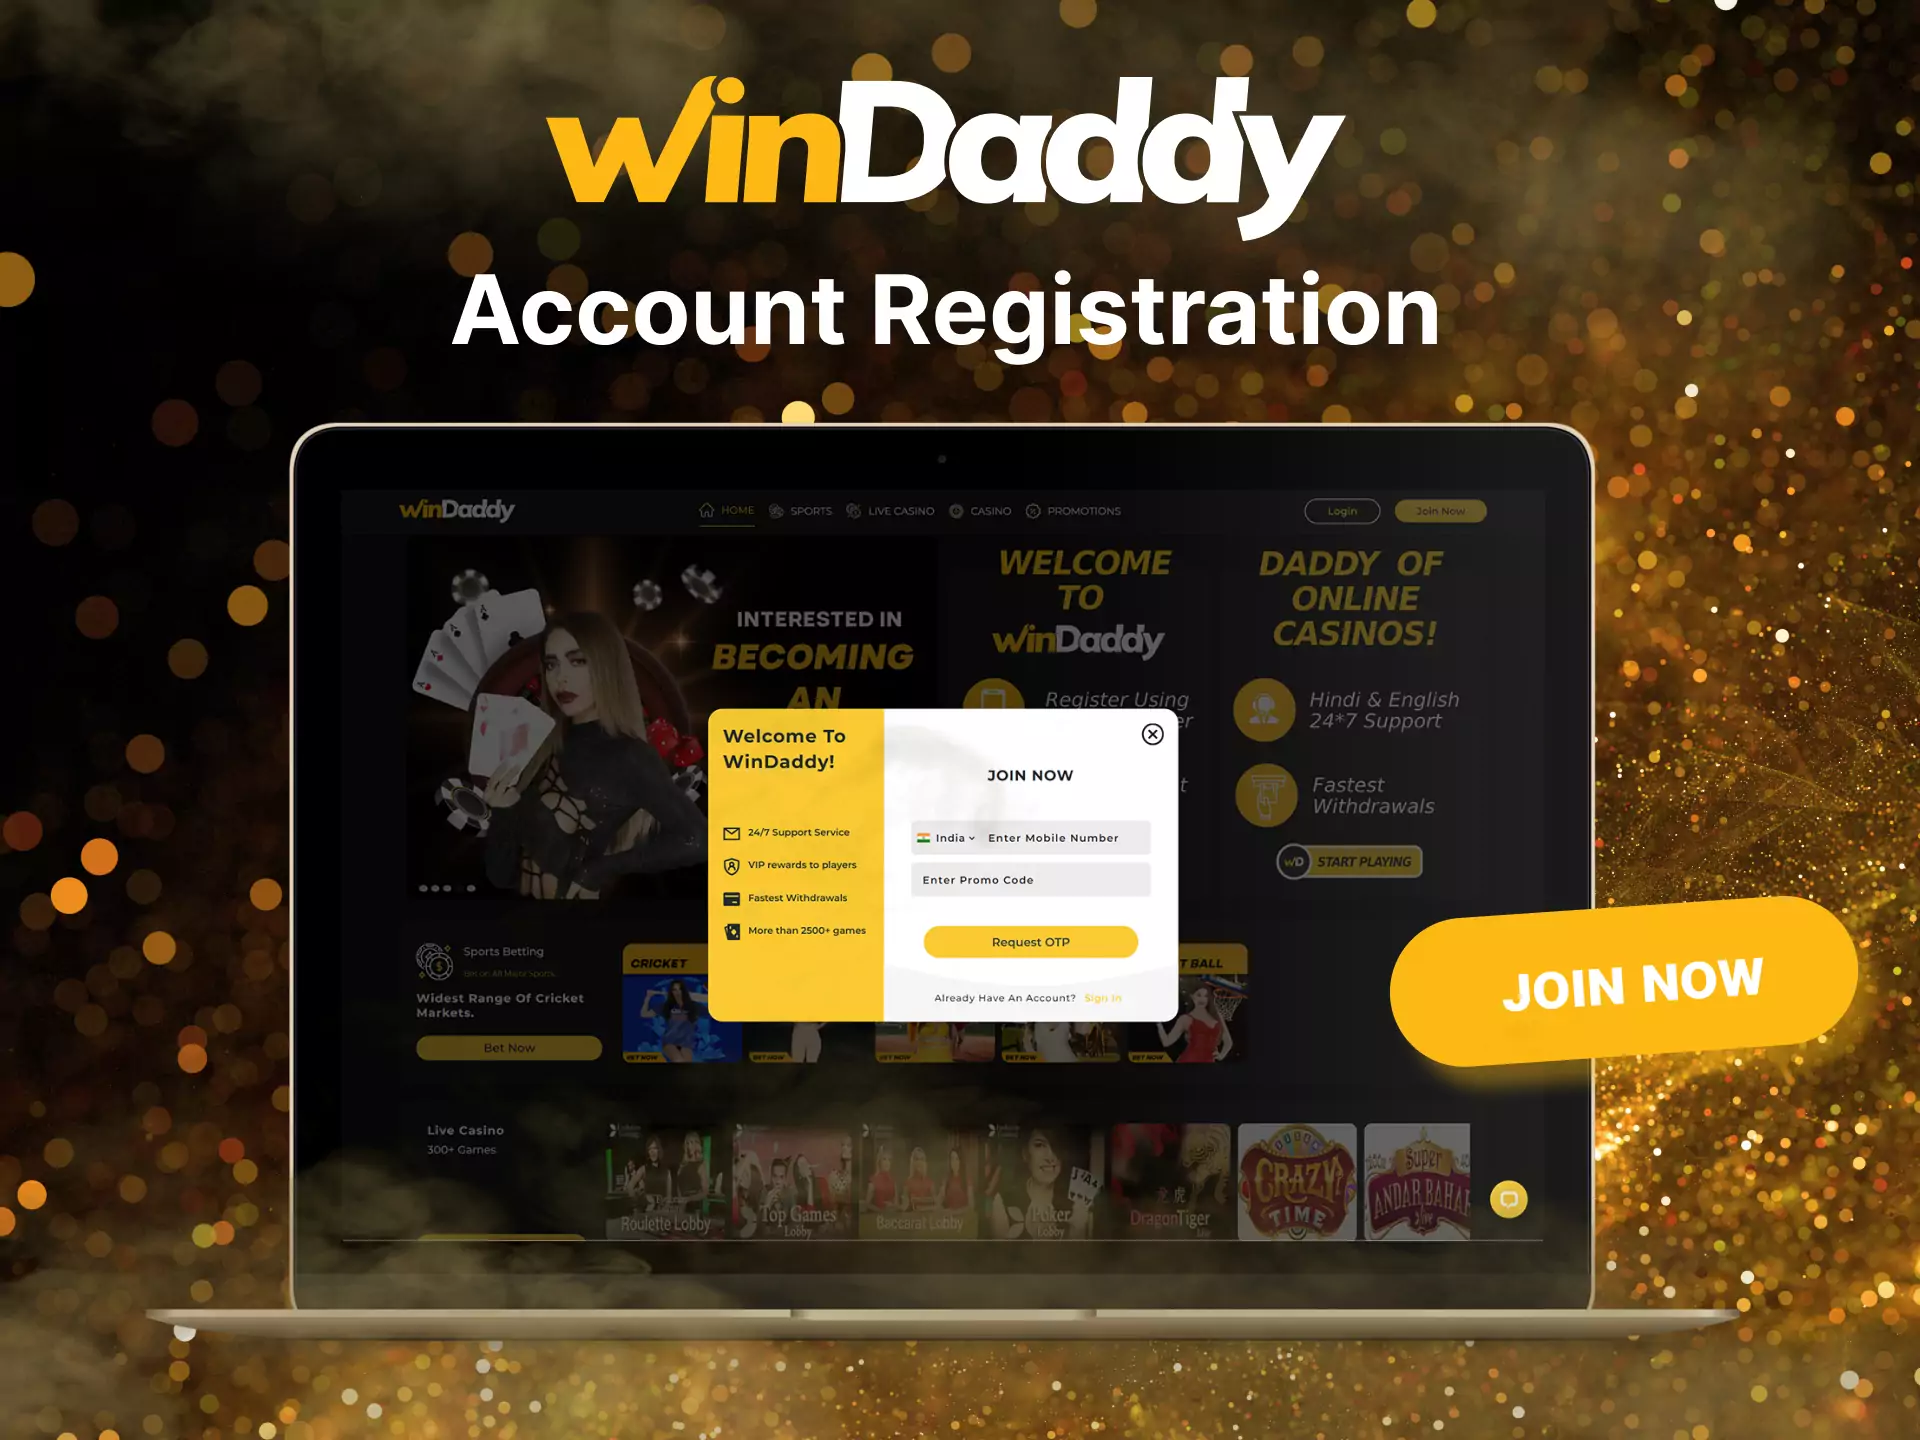 Register on the Windaddy website and enjoy many benefits.